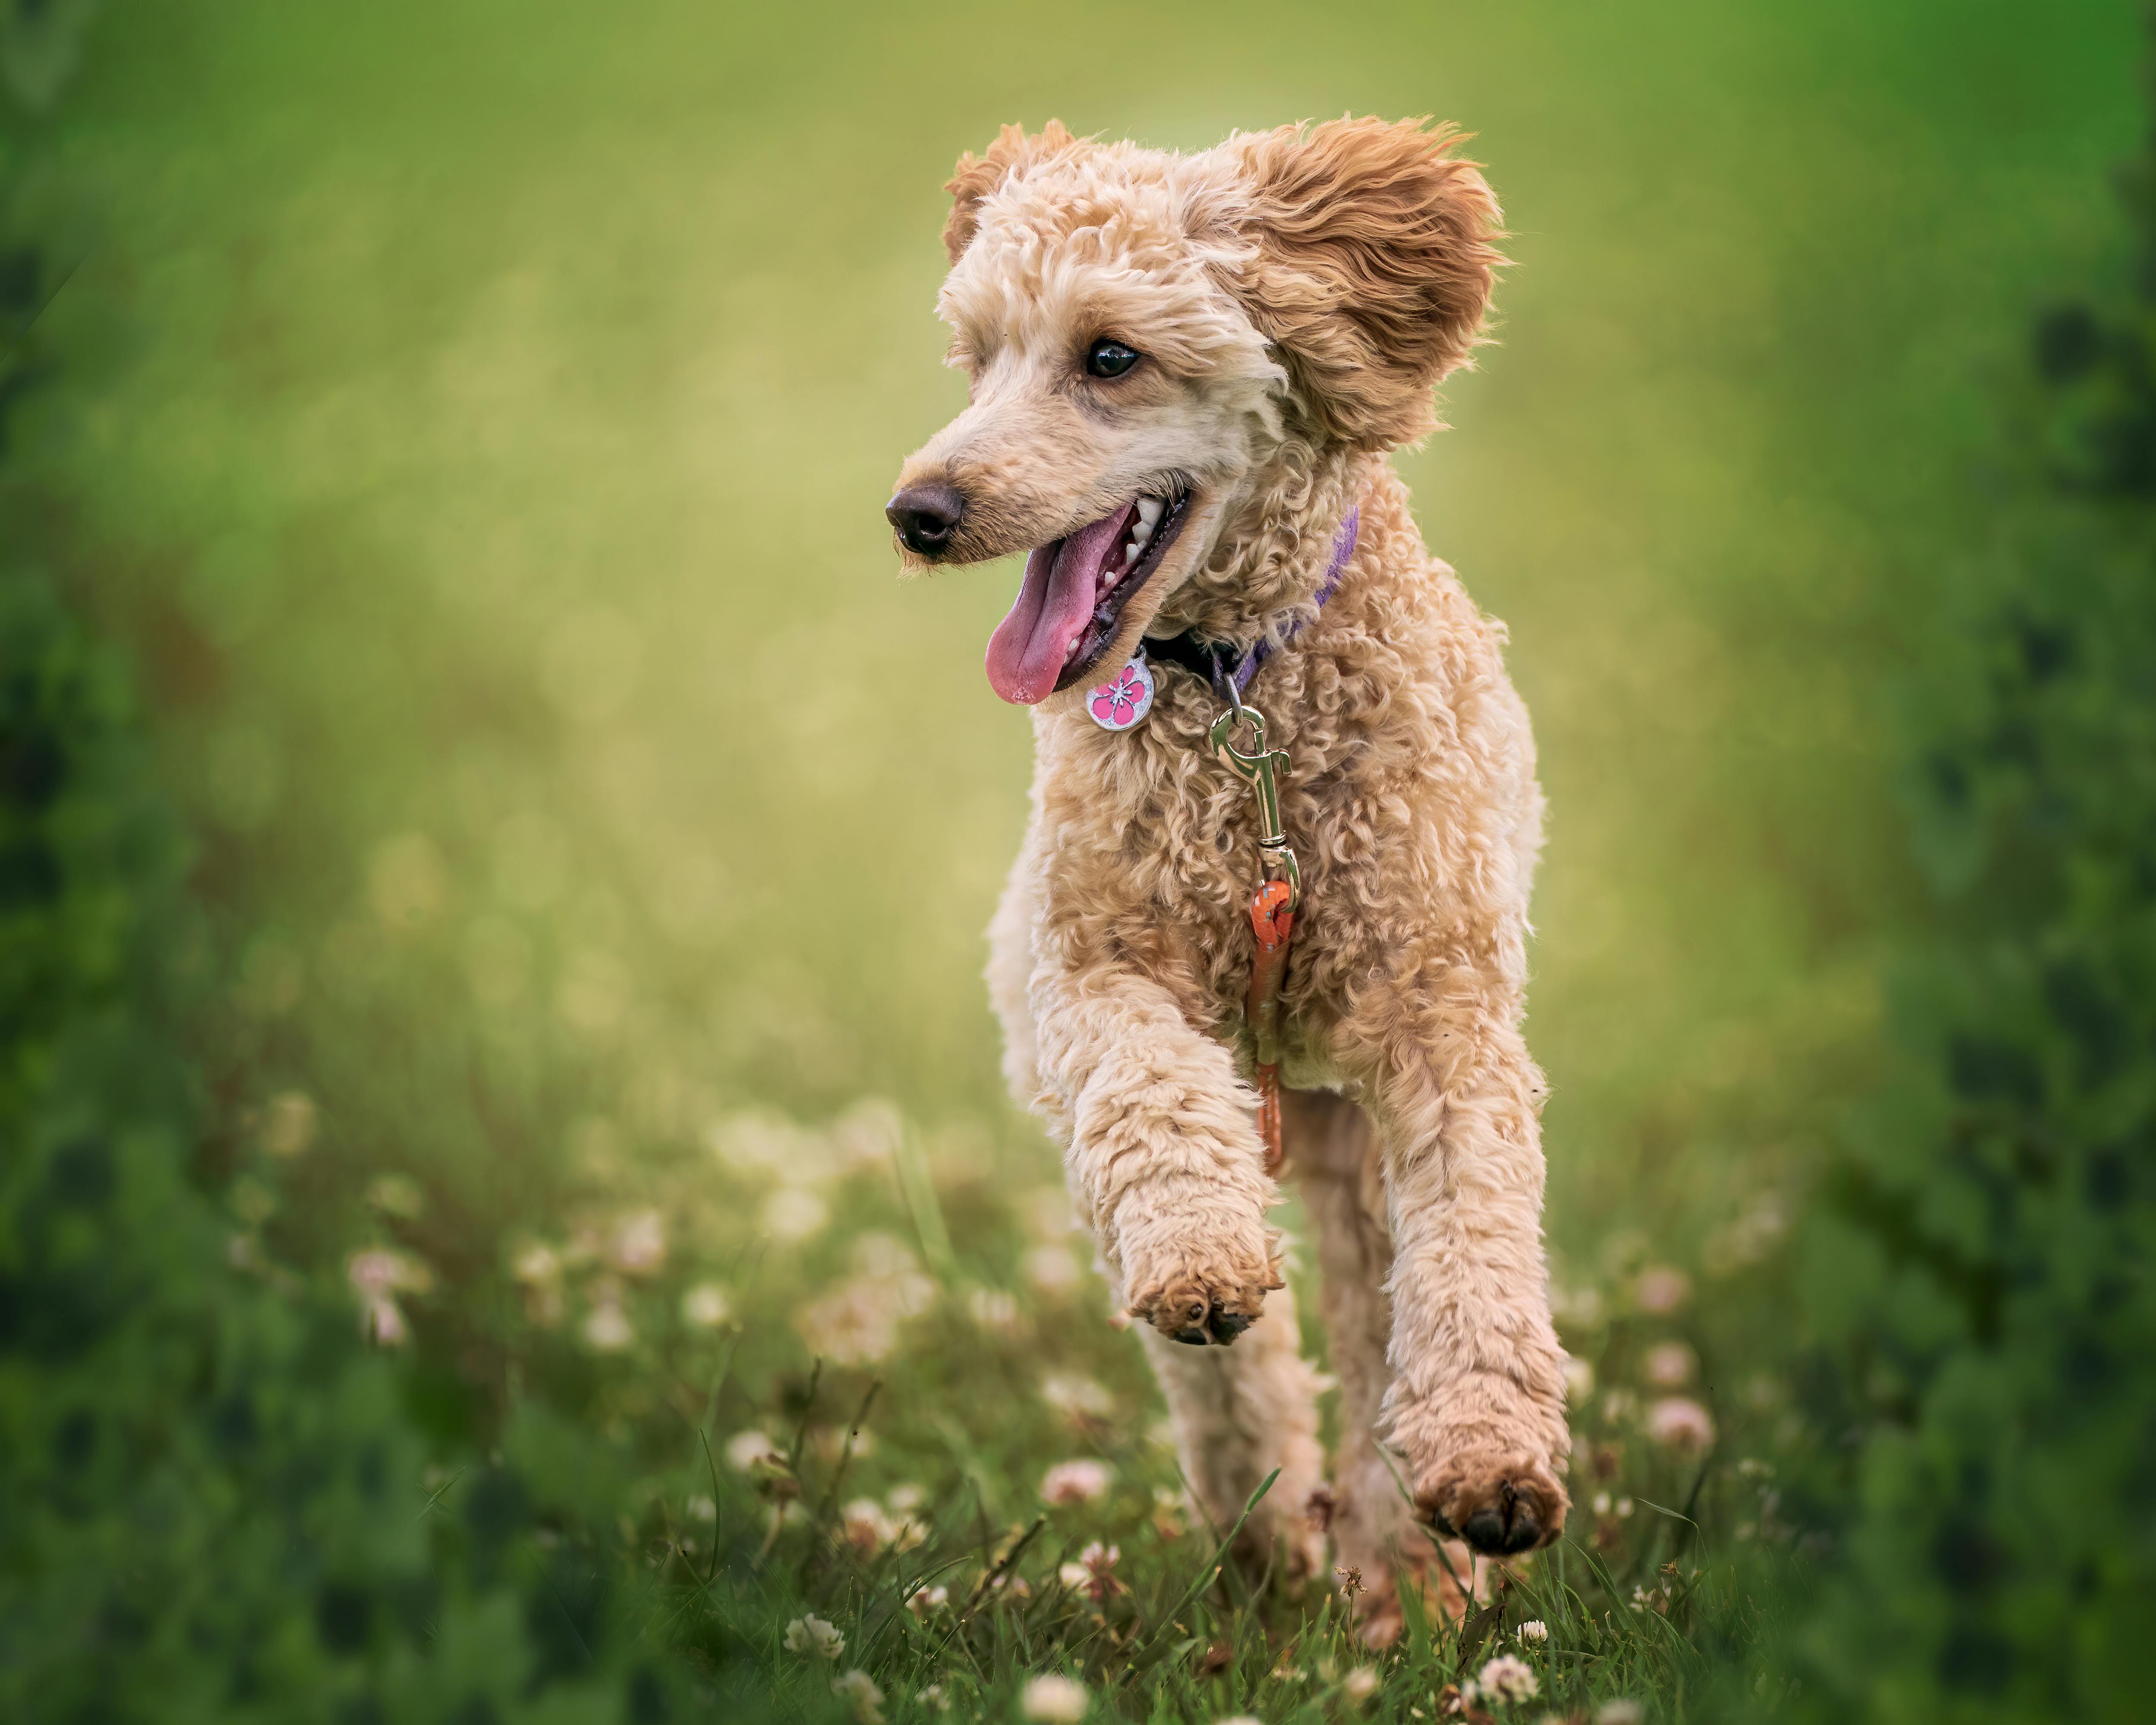 Playful purebred dog running along grassy meadow in park · Free Stock Photo